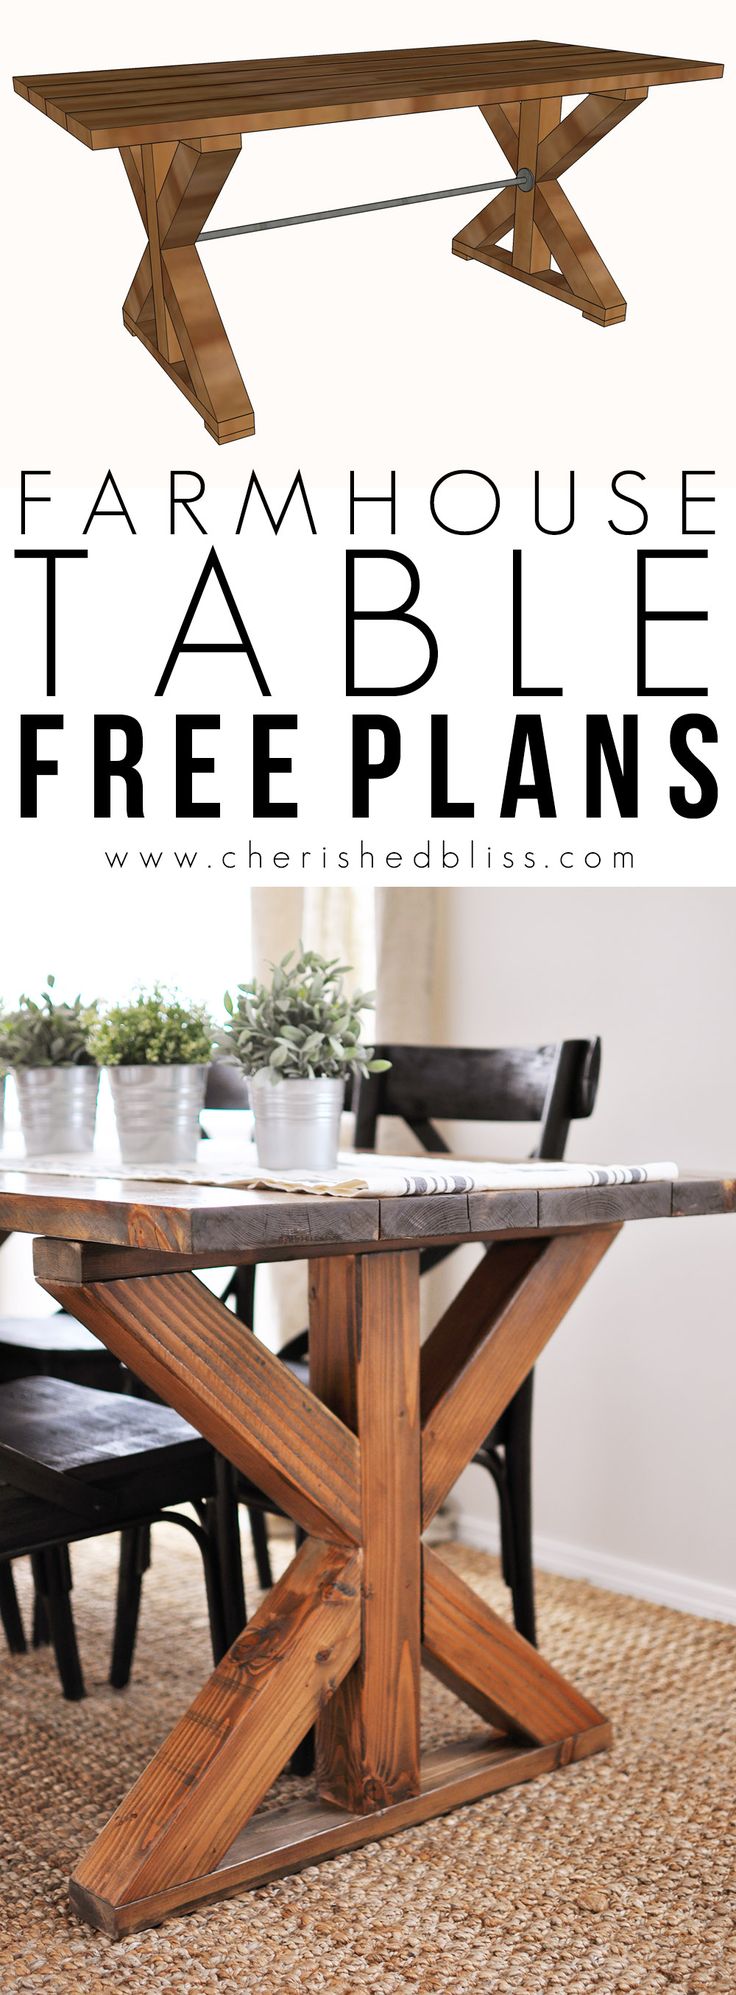 This easy to build Farmhouse Table is the perfect addition to any dining or brea...